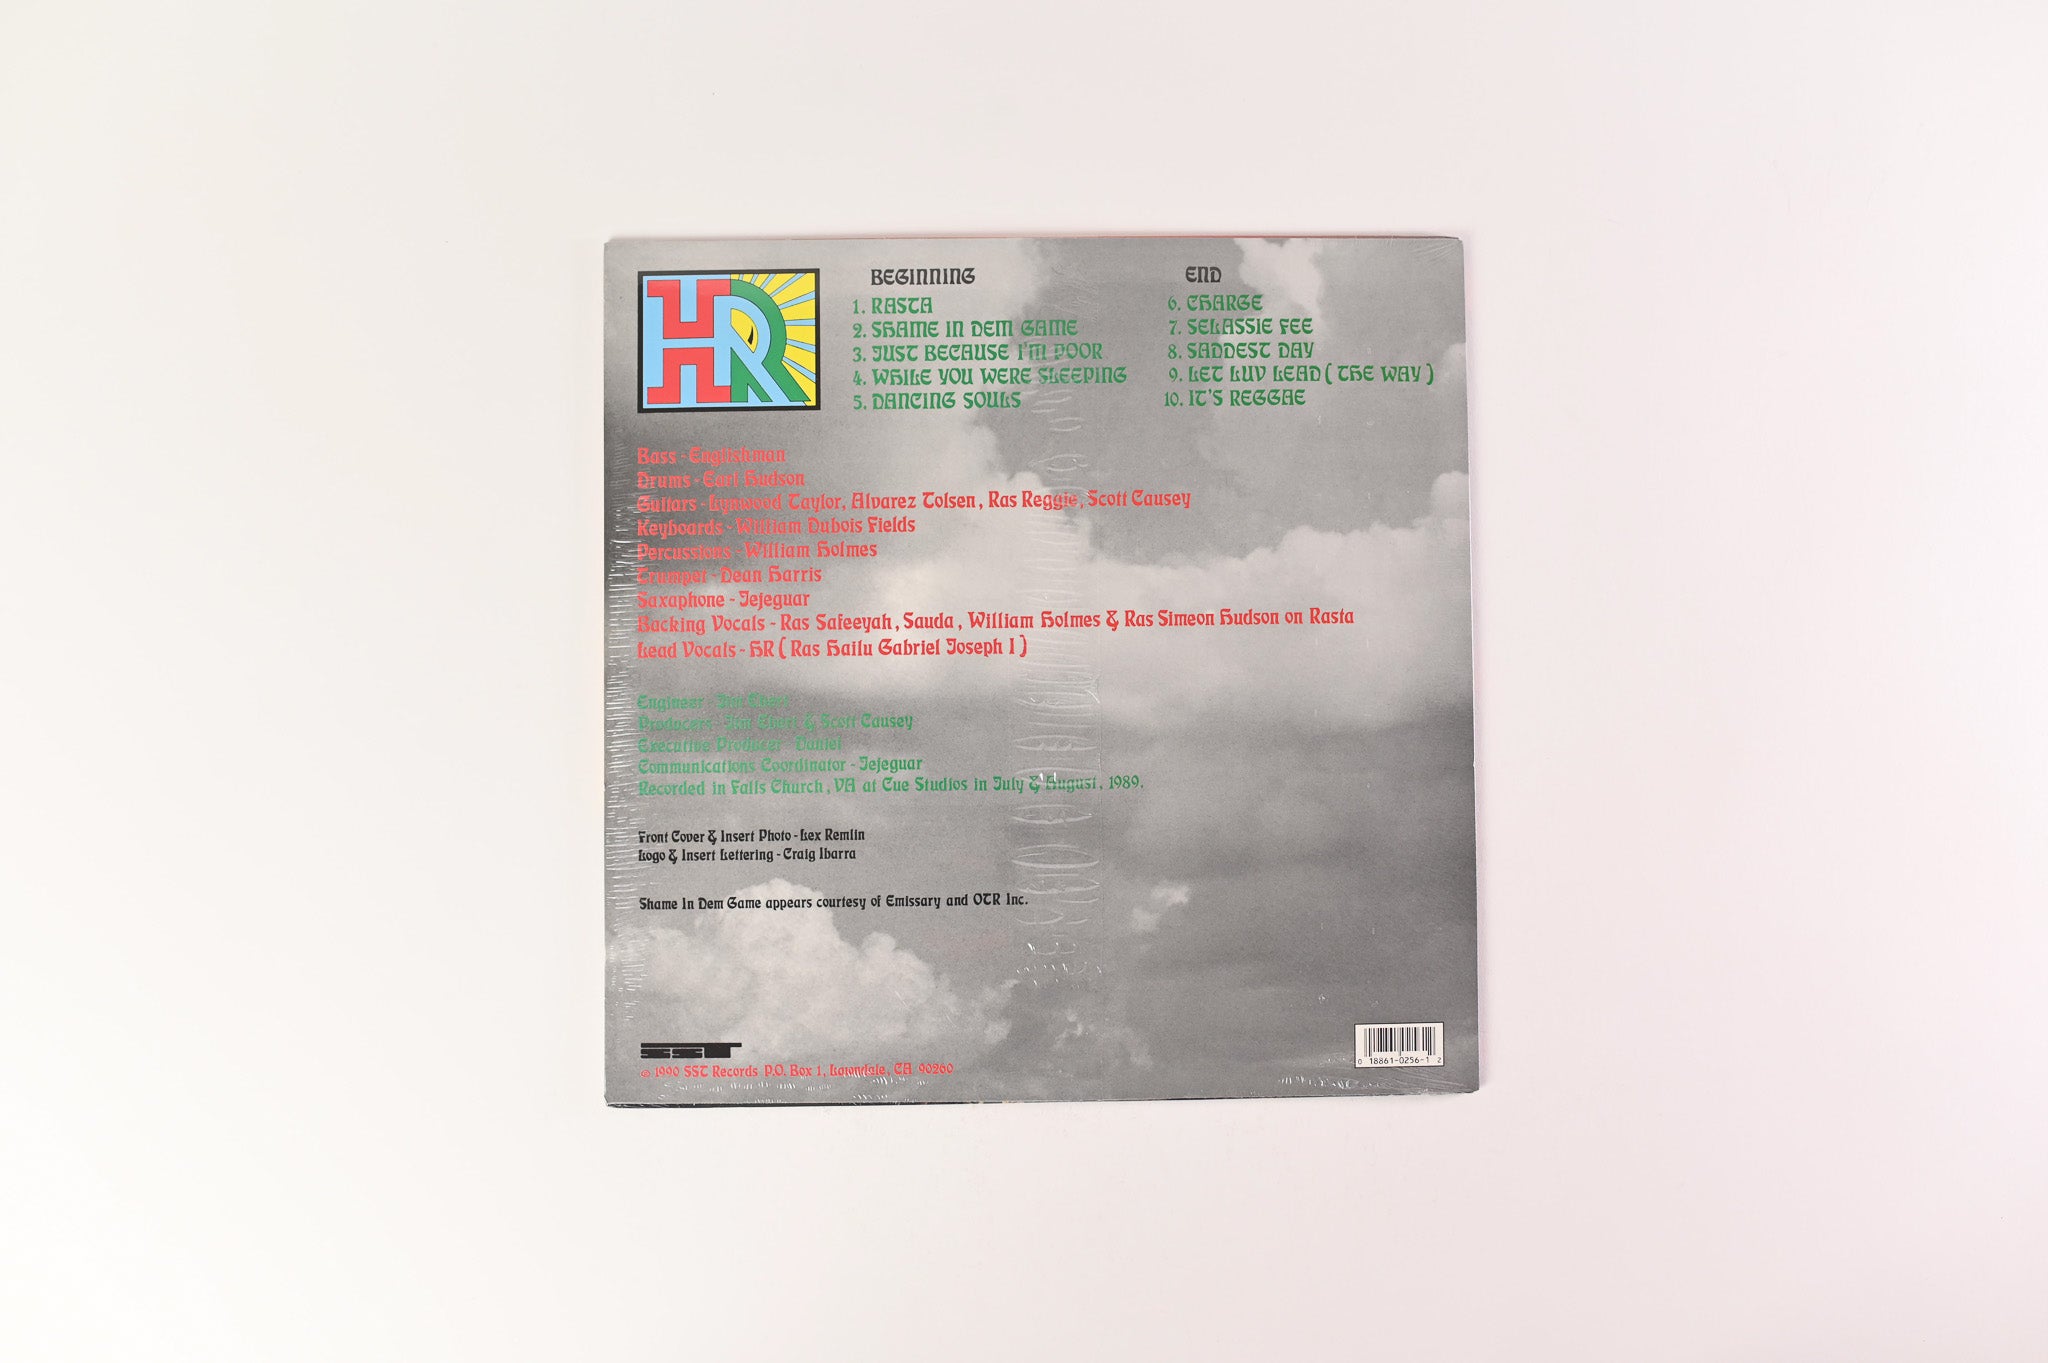 H.R. - Charge on SST - Sealed